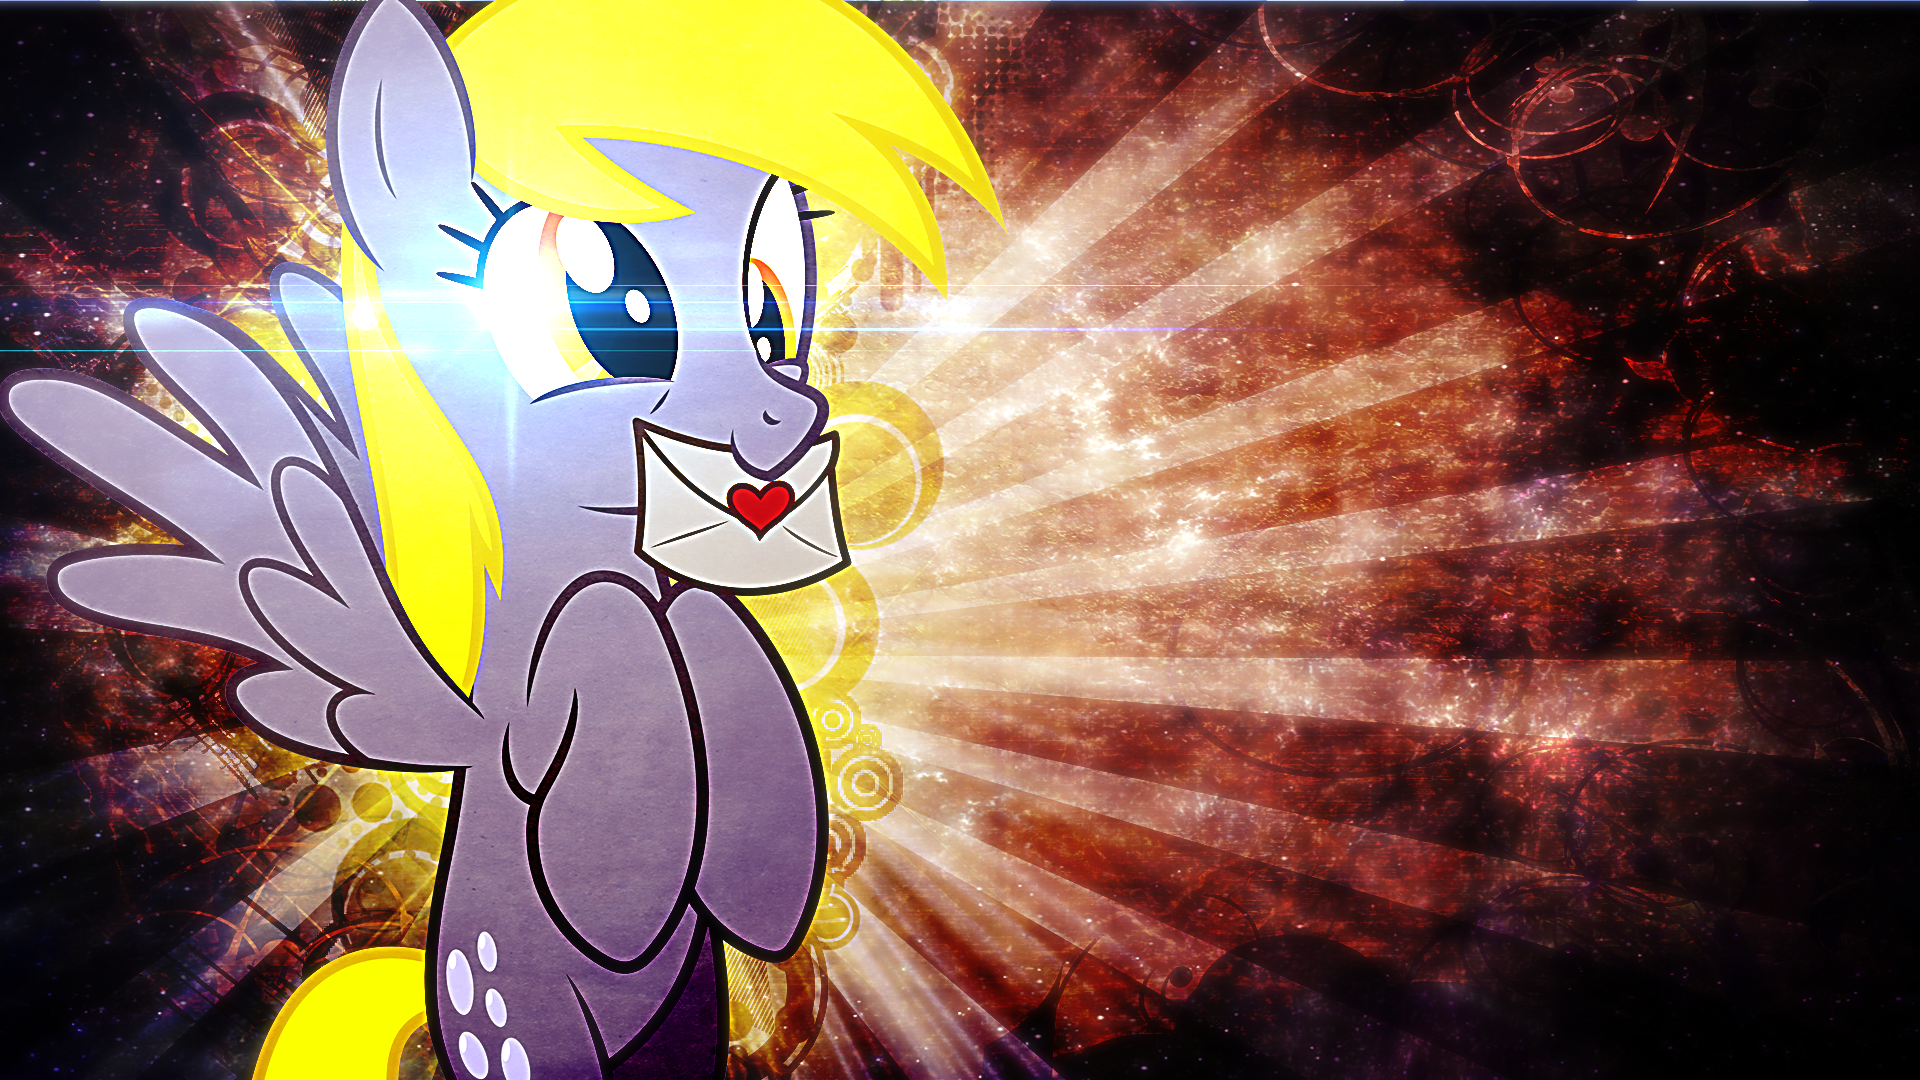 Derpy brought you a letter - wallpaper by Tzolkine and ZuTheSkunk